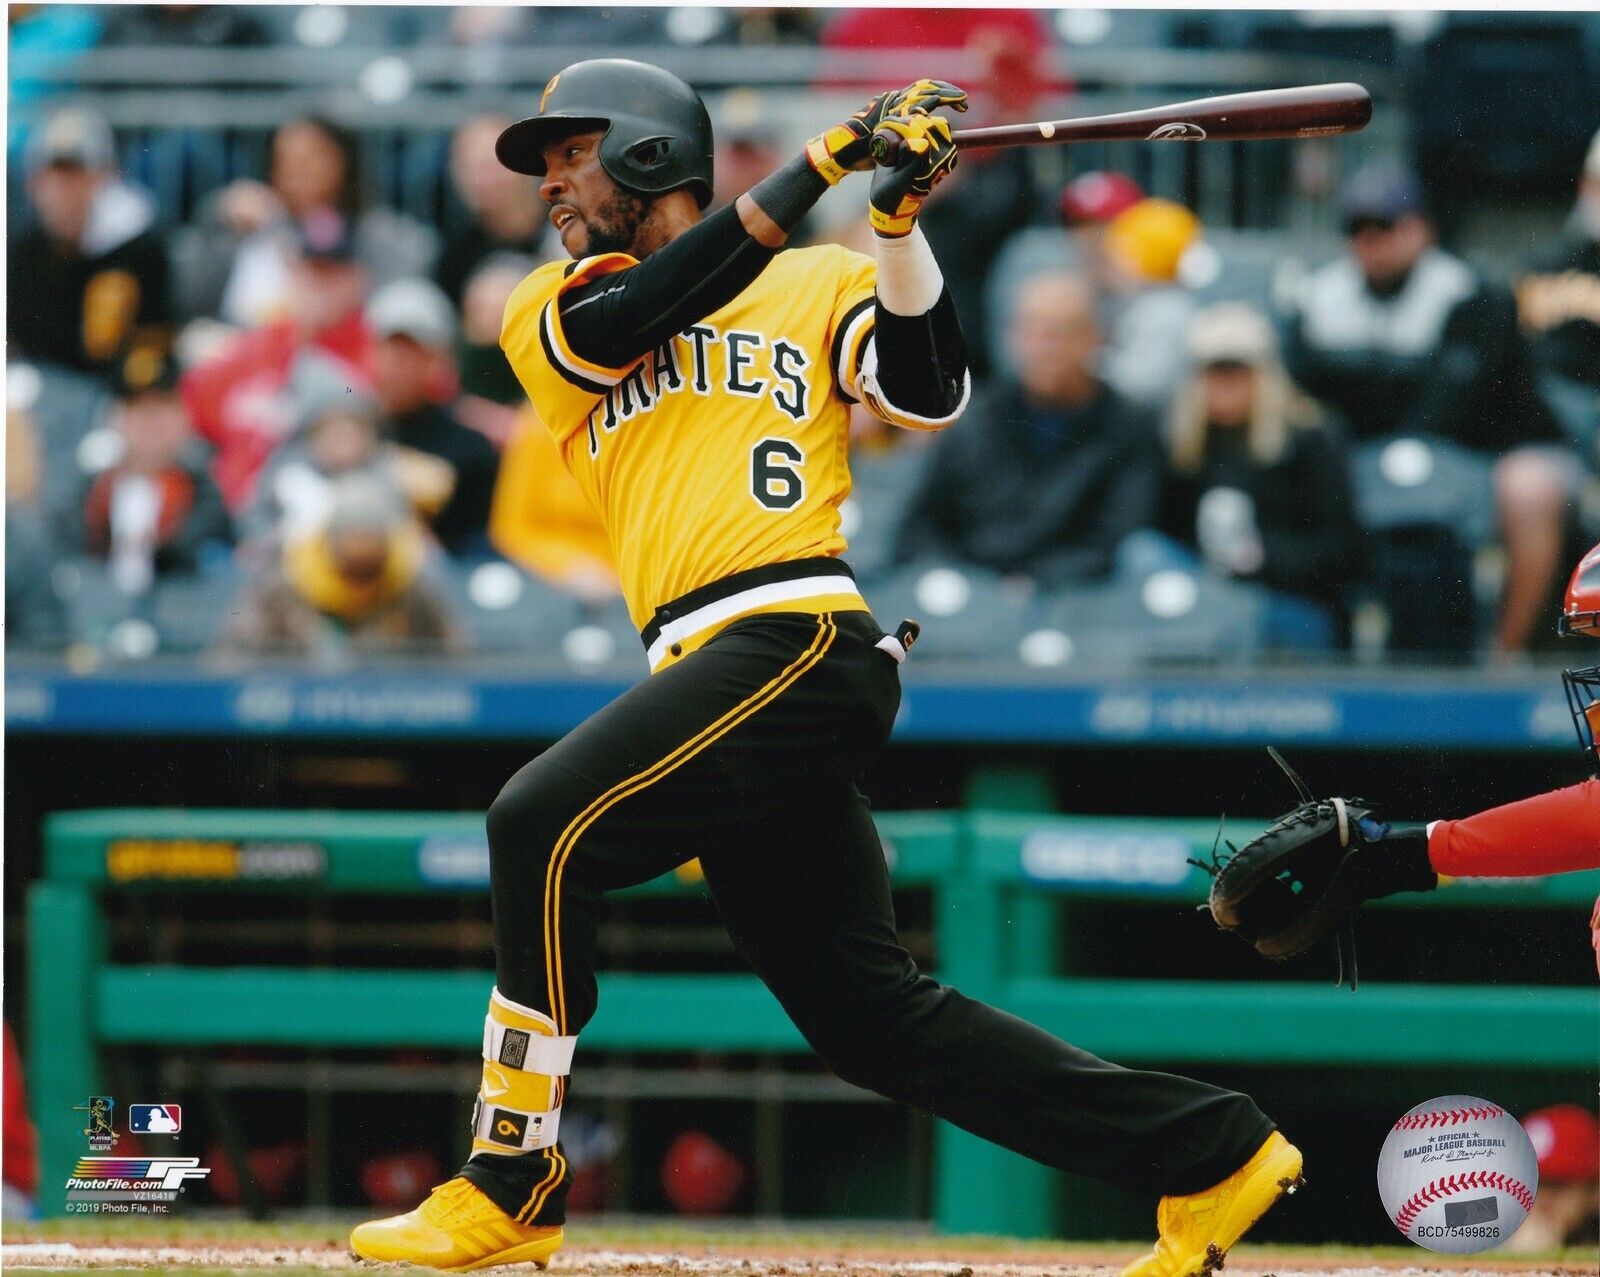 STARLING MARTE PITTSBURGH PIRATES Photo Poster paintingFILE LICENSED 8x10 Photo Poster painting